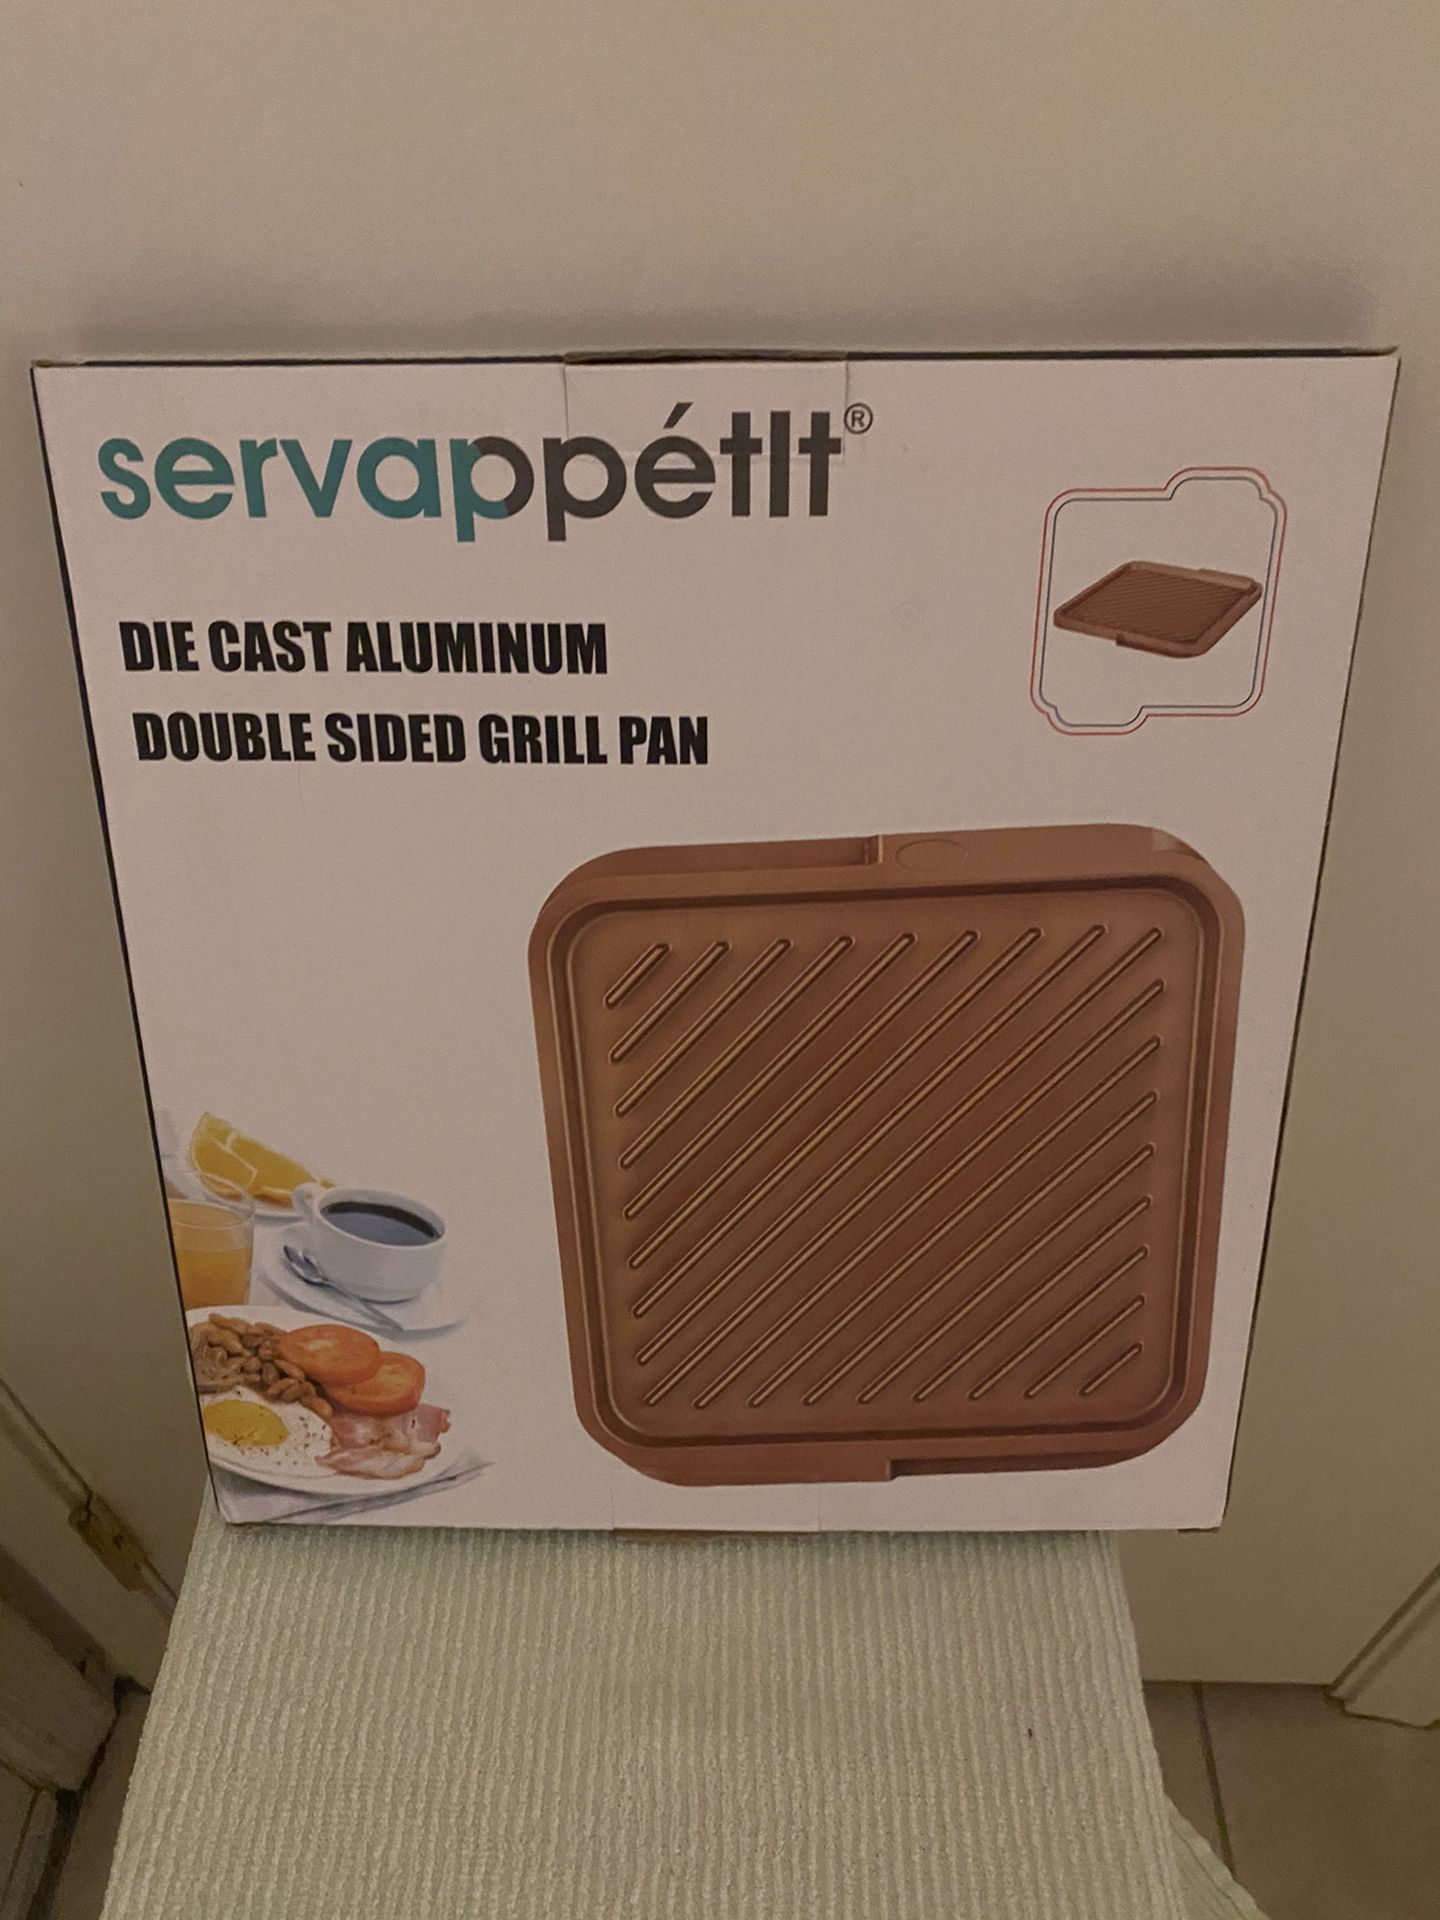 DOUBLE SIDED GRILL PAN/DIE CAST ALUMINUM GRILL PAN